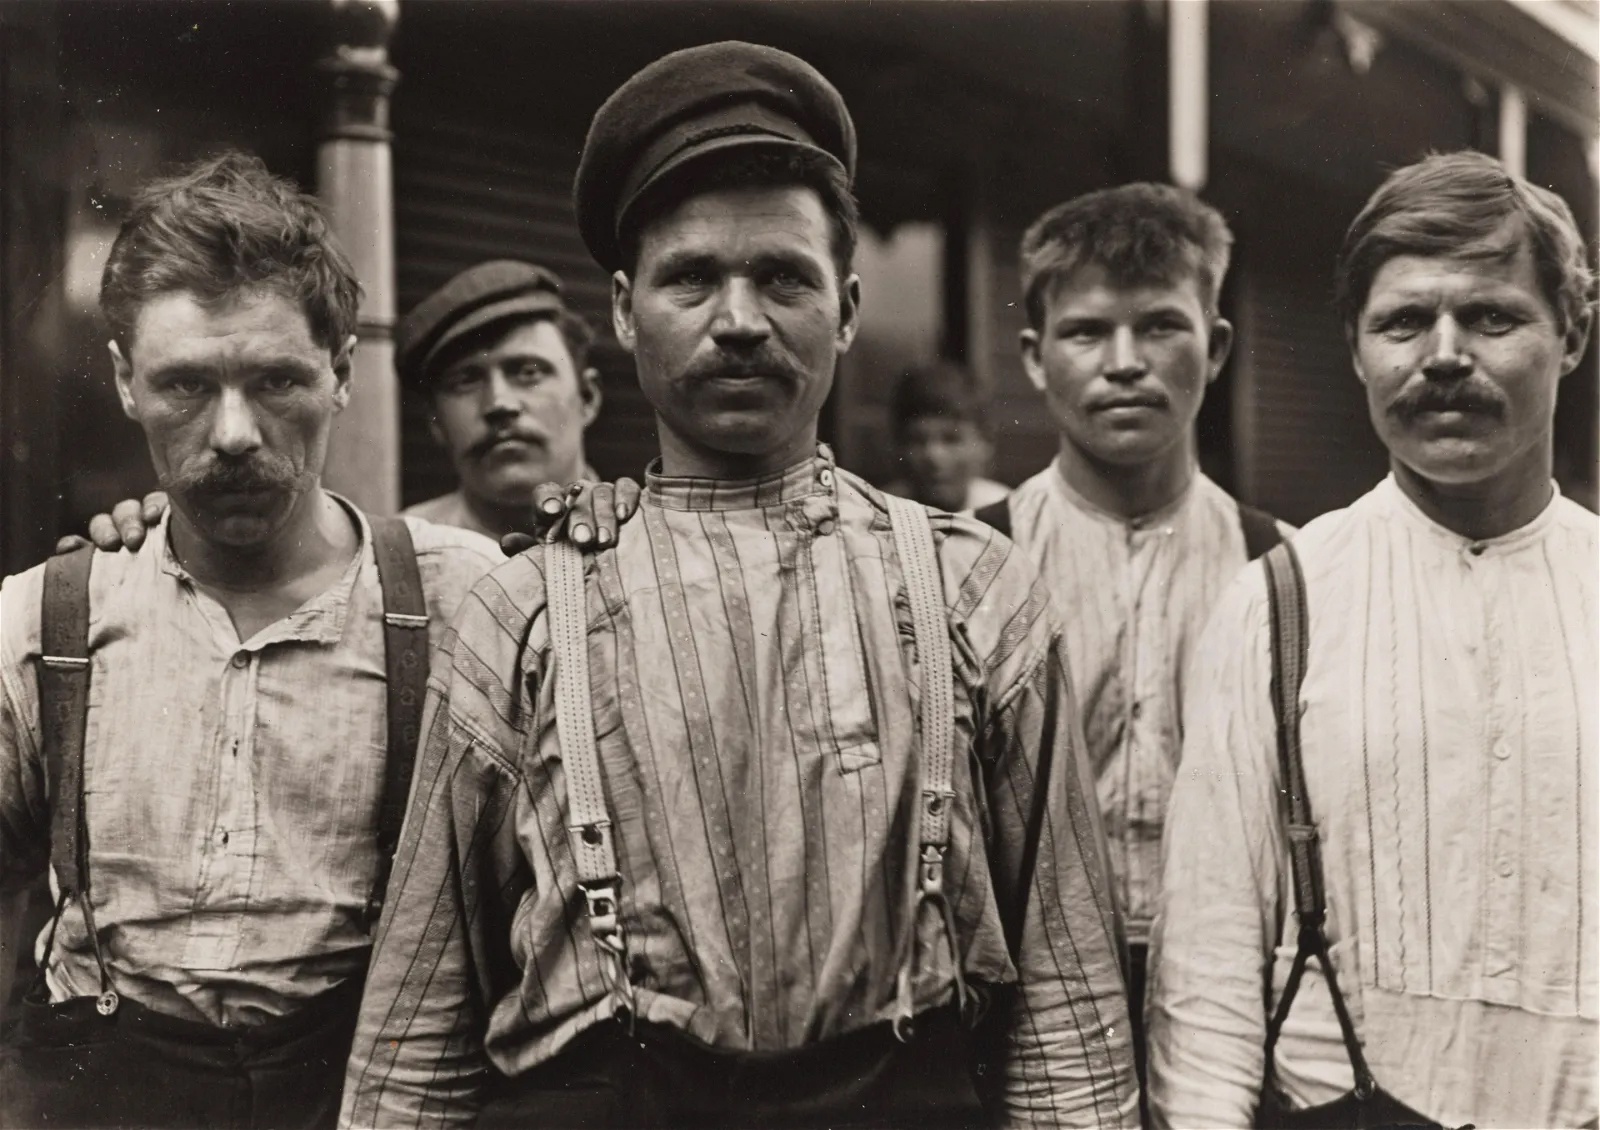 (7) Lewis Wickes Hine (1874-1940) Photographs - Image 6 of 15